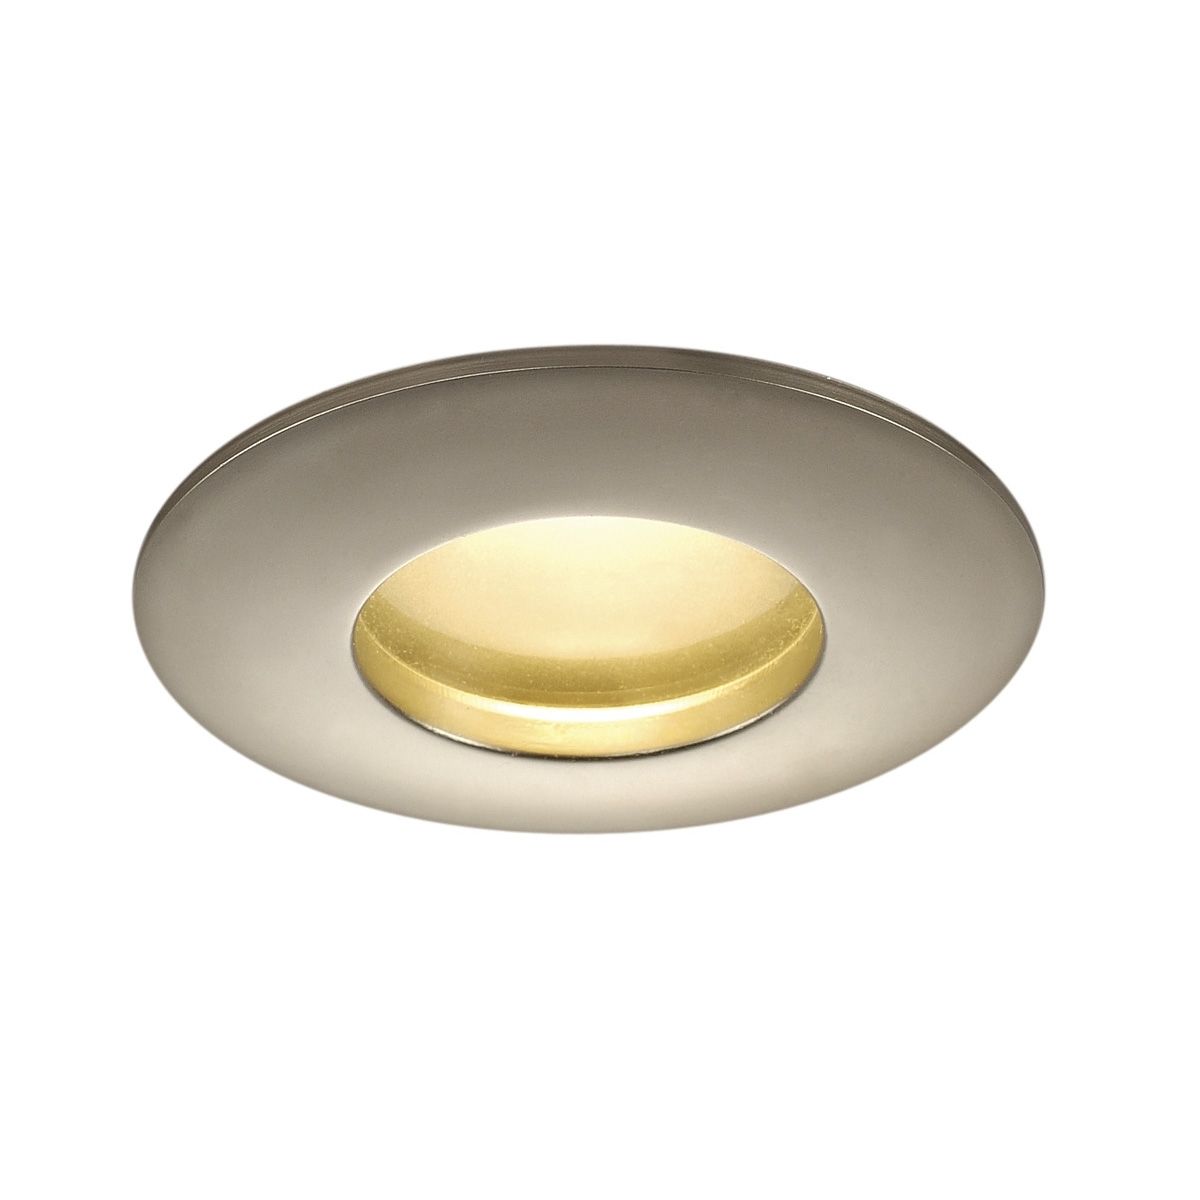 Out 65, Outdoor Recessed Ceiling Light, Led, 3000k, Round, Titanium Inside Outdoor Recessed Ceiling Lights (View 7 of 15)